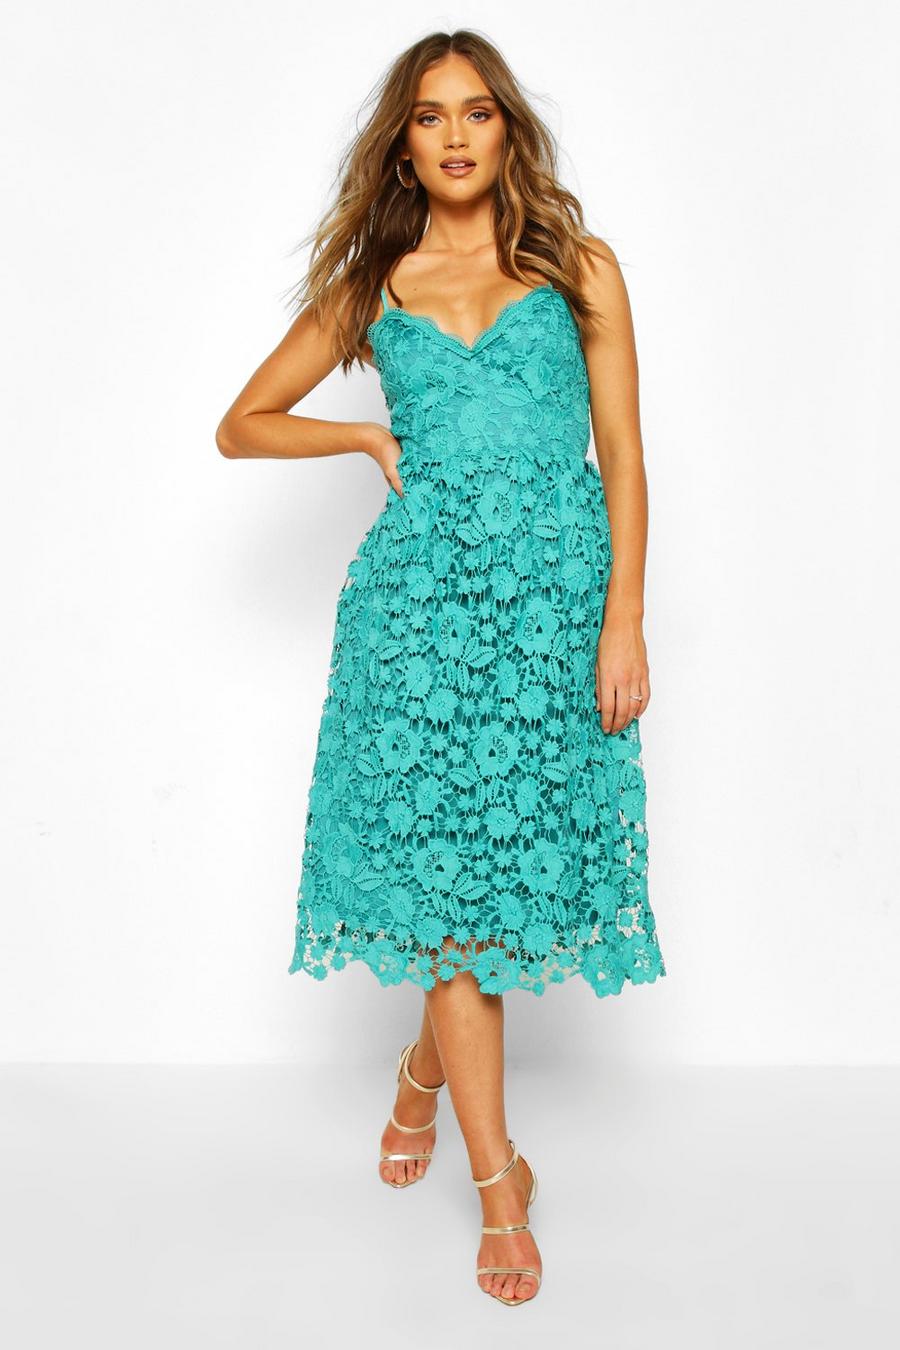 Teal green Strappy Crochet Lace Skater Midi Dress